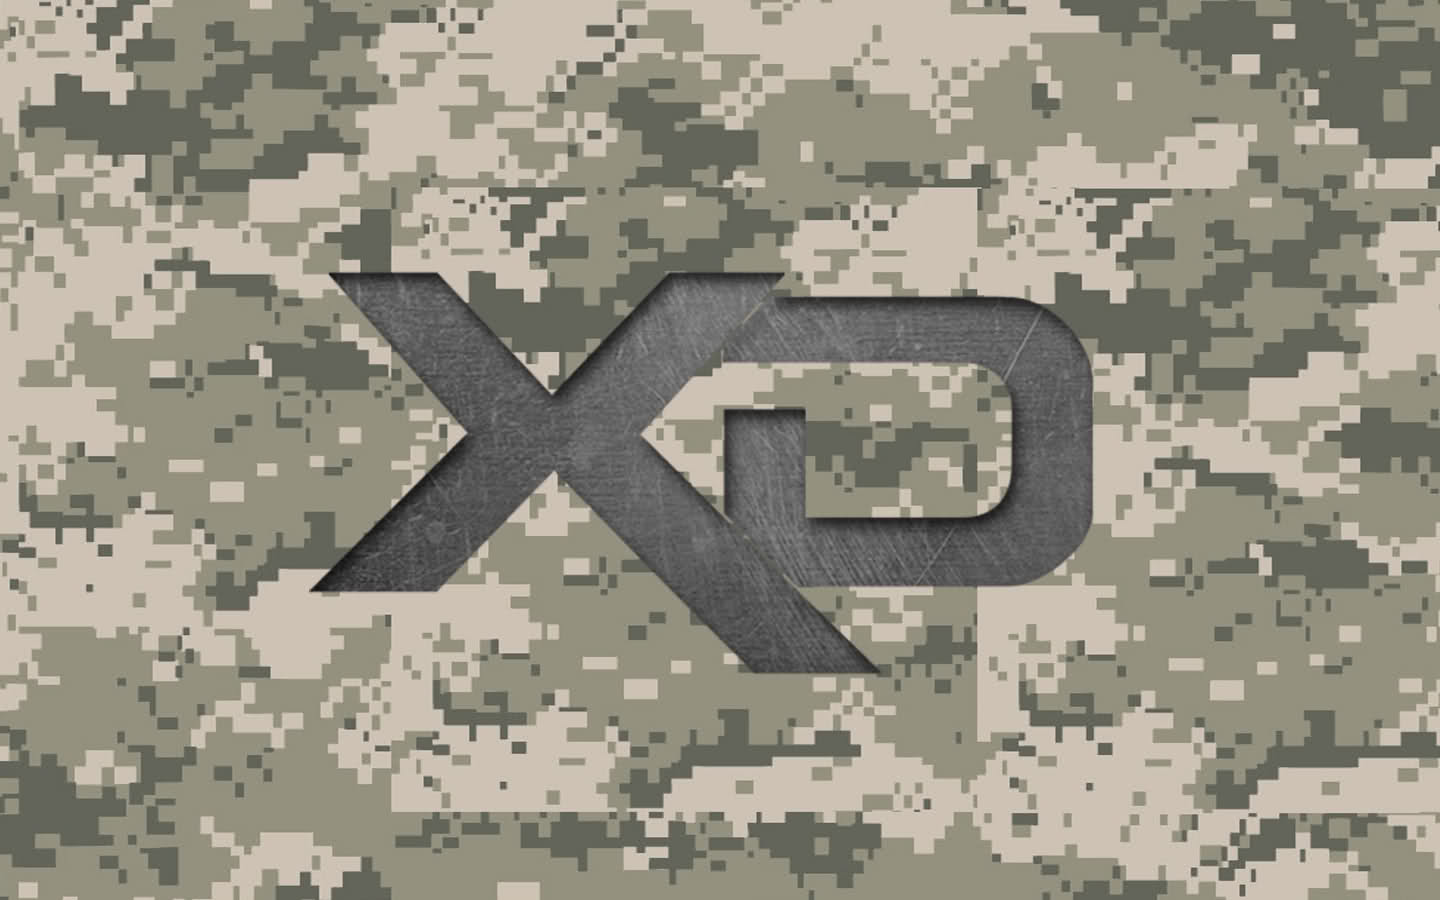 Made an XD Wallpaper: COME GET IT!! | Page 7 | Springfield XD Forum